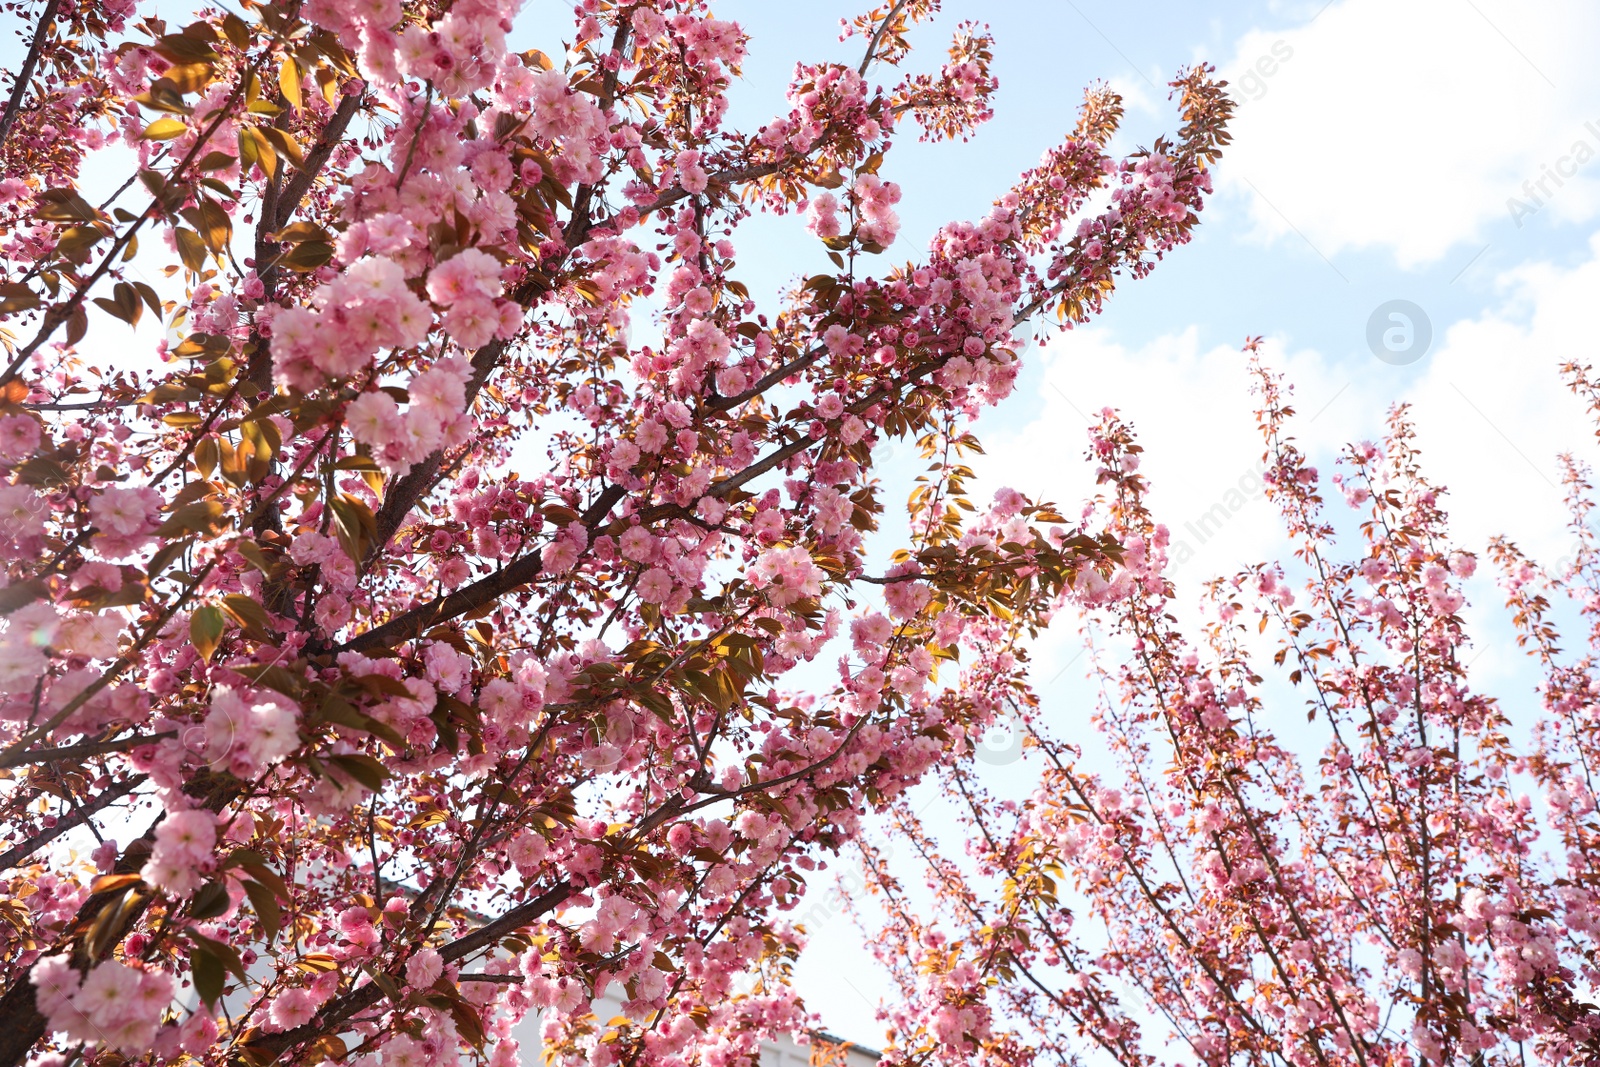 Photo of Delicate spring pink cherry blossoms on trees against blue sky